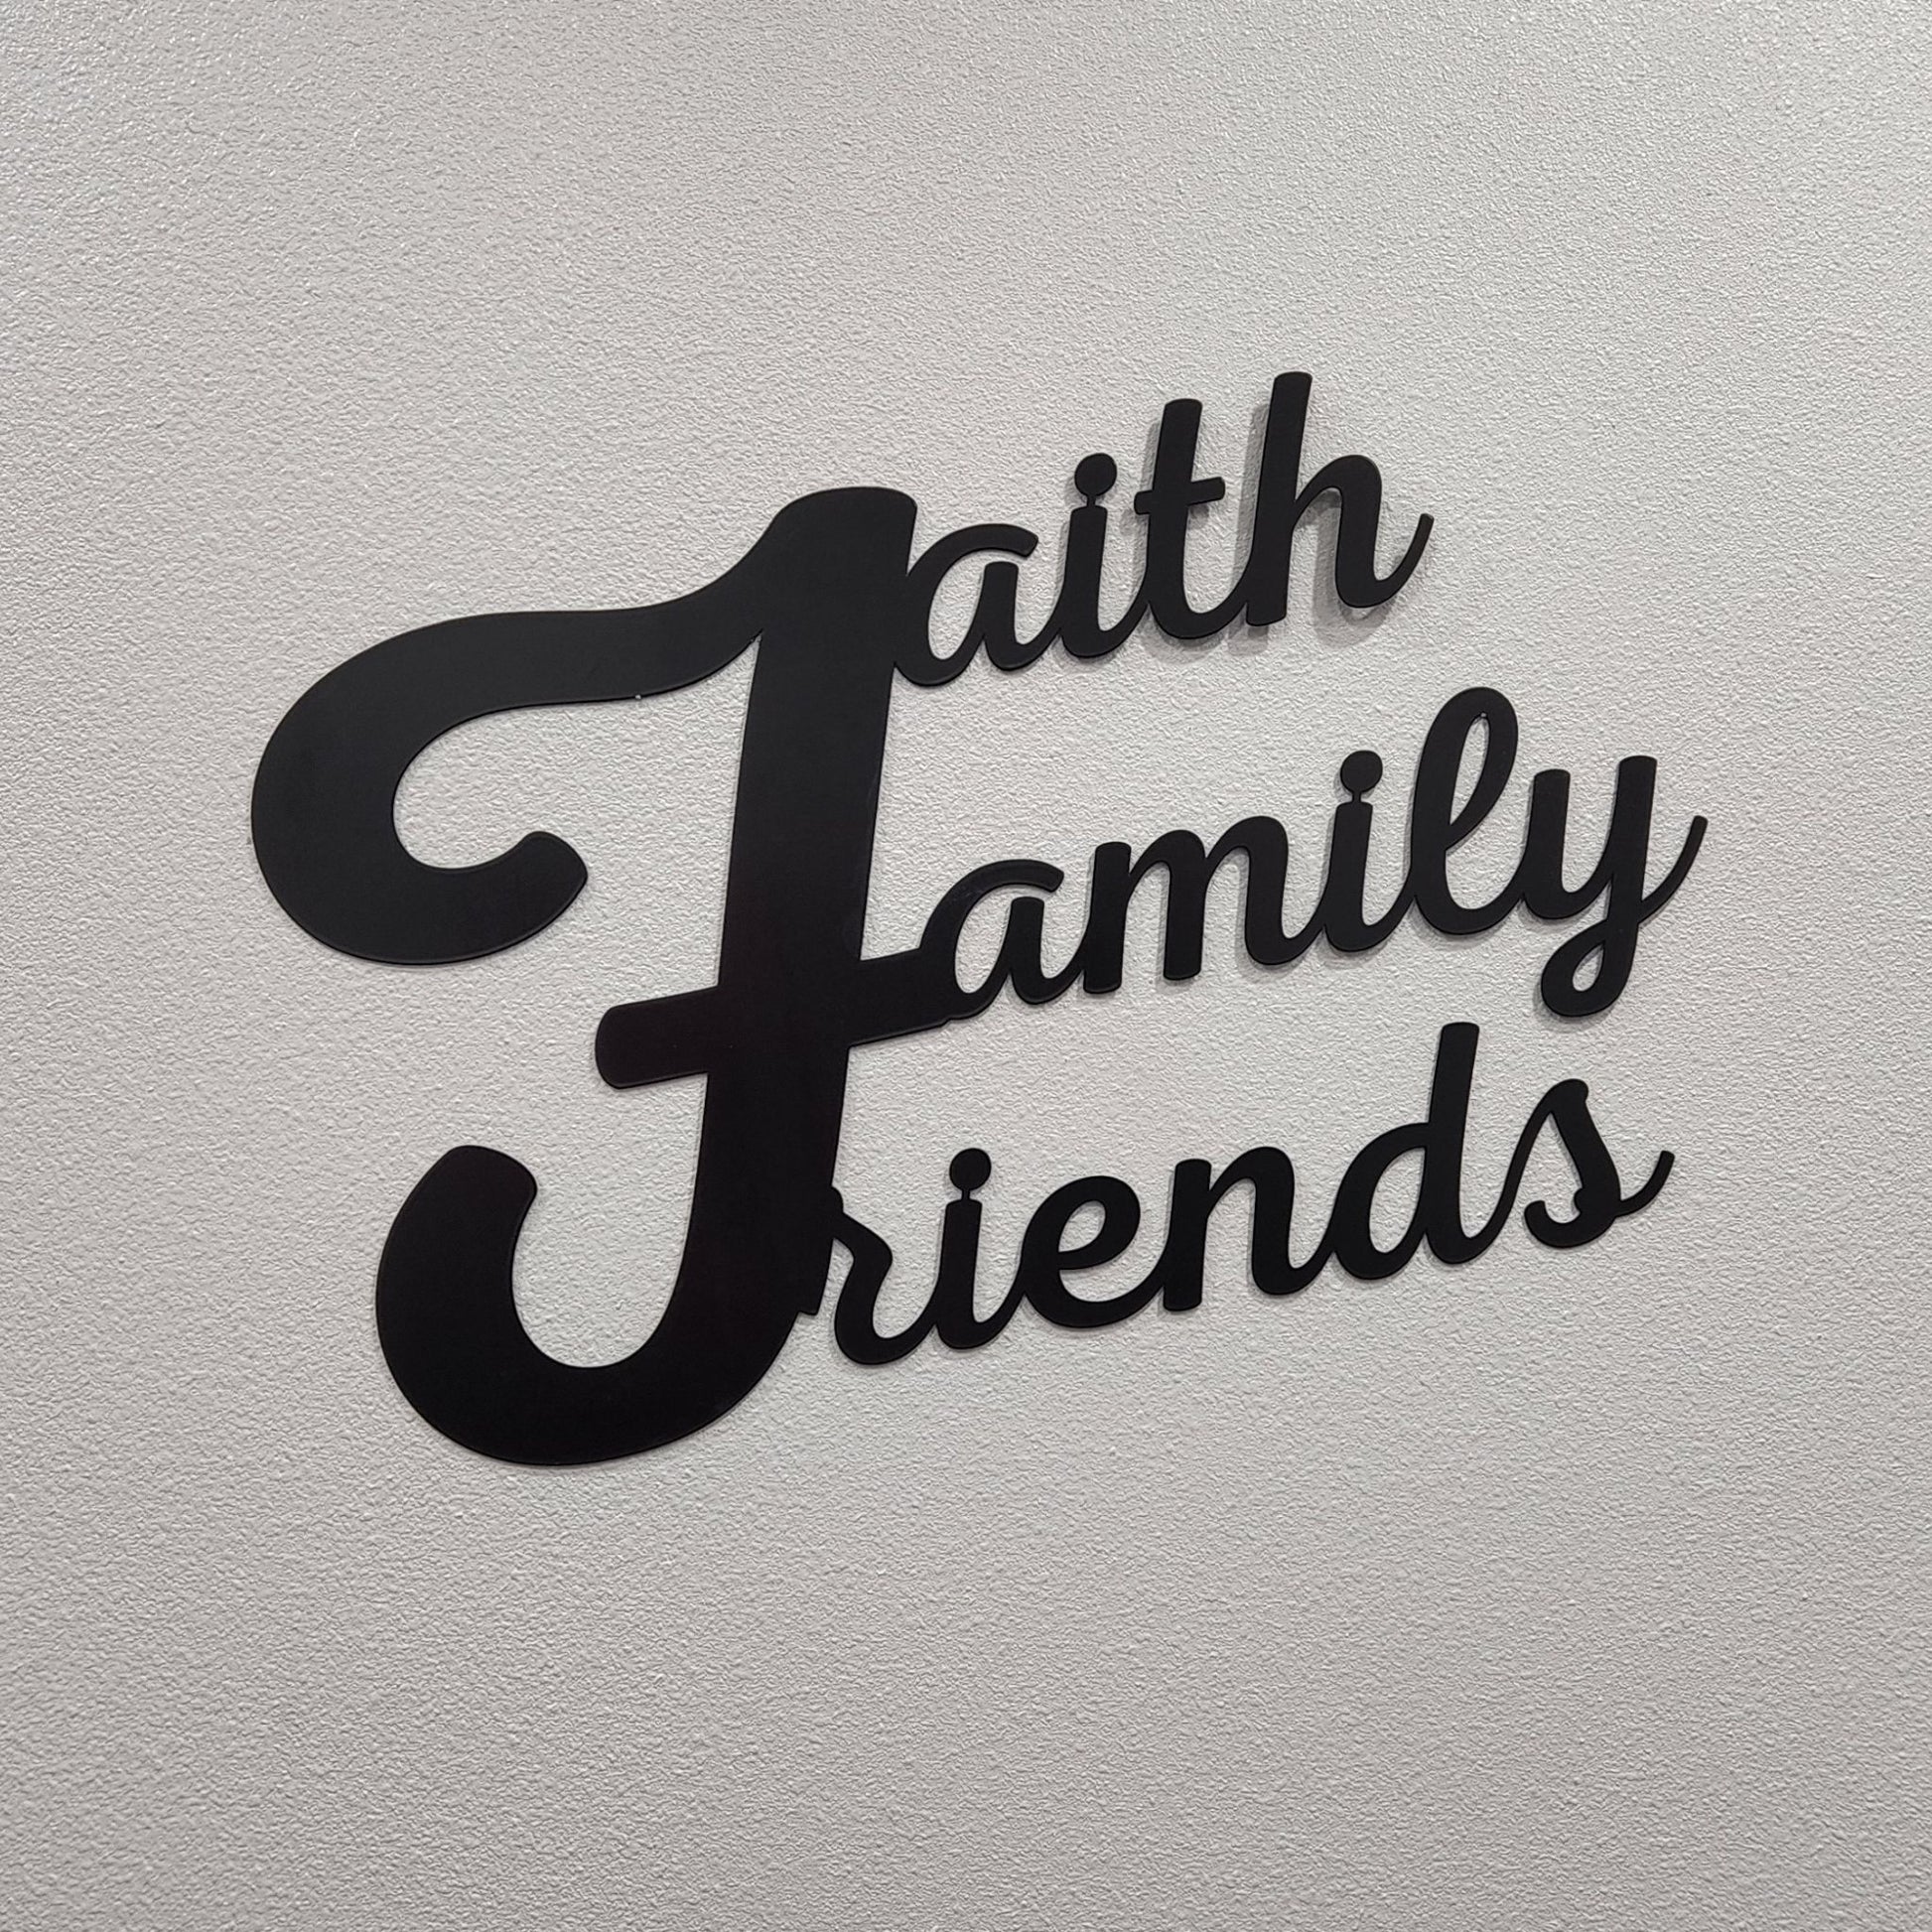 family and friends words